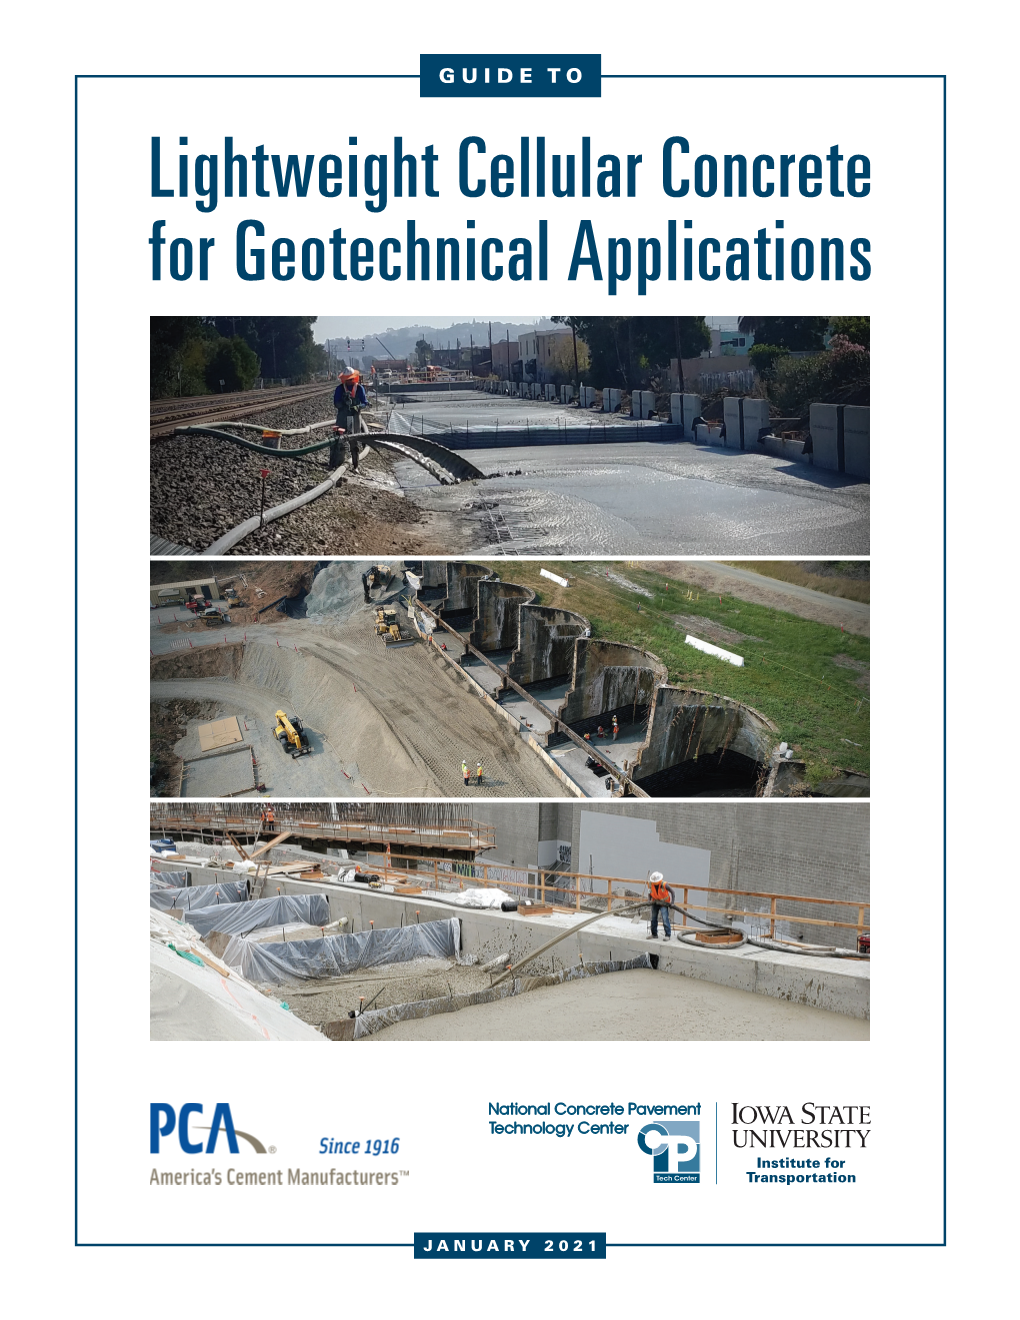 GUIDE to Lightweight Cellular Concrete for Geotechnical Applications